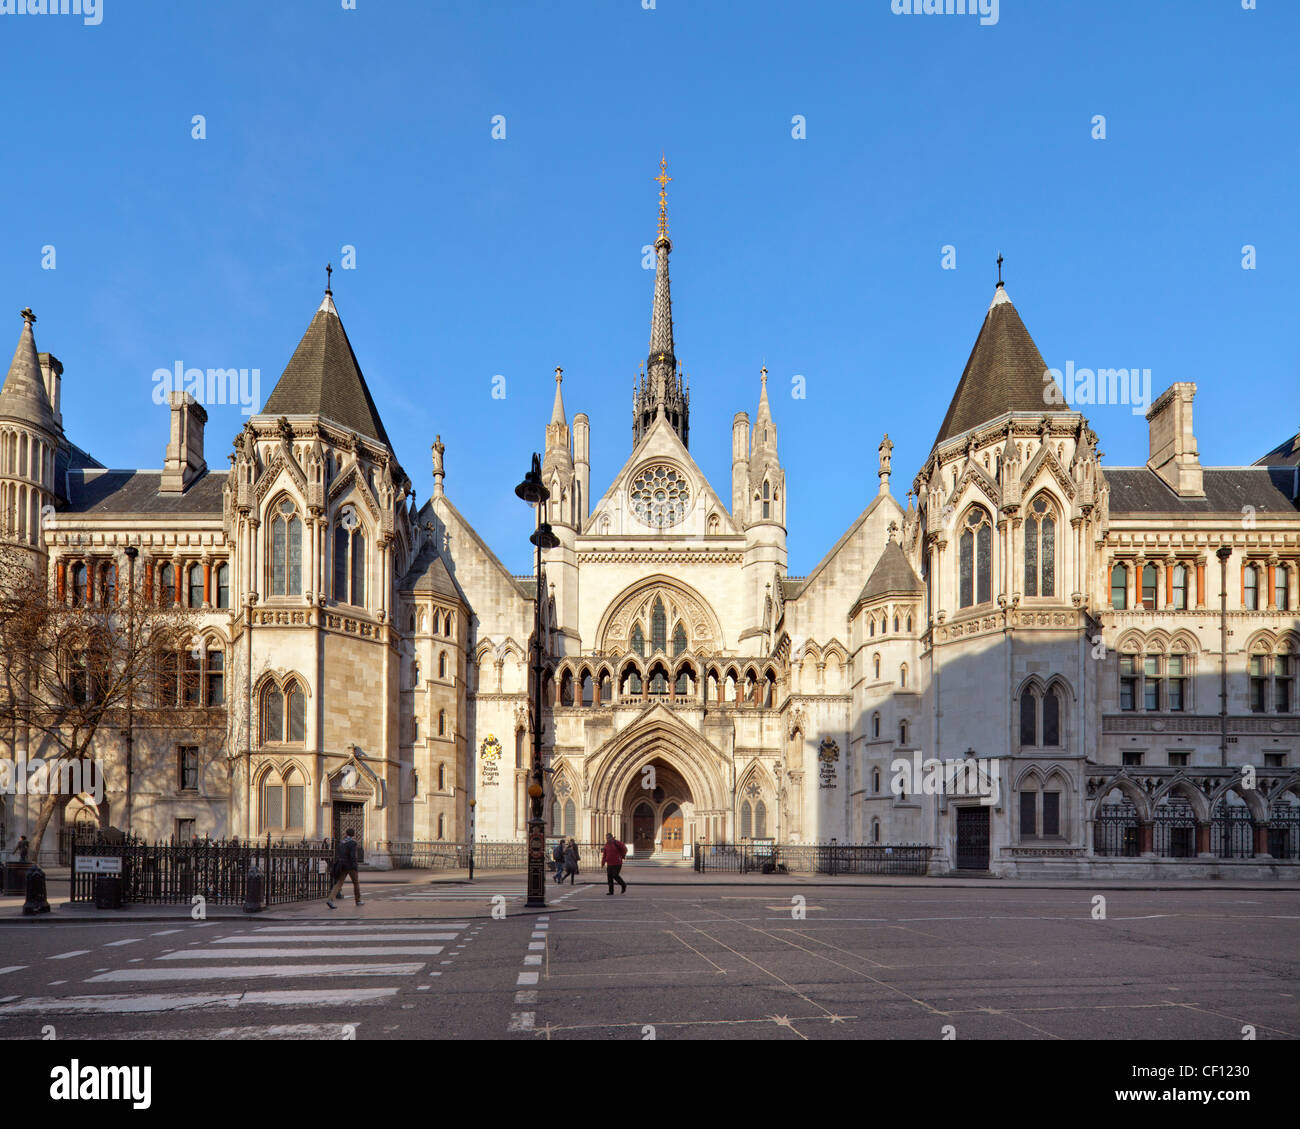 Royal Courts of Justice, London Stock Photo